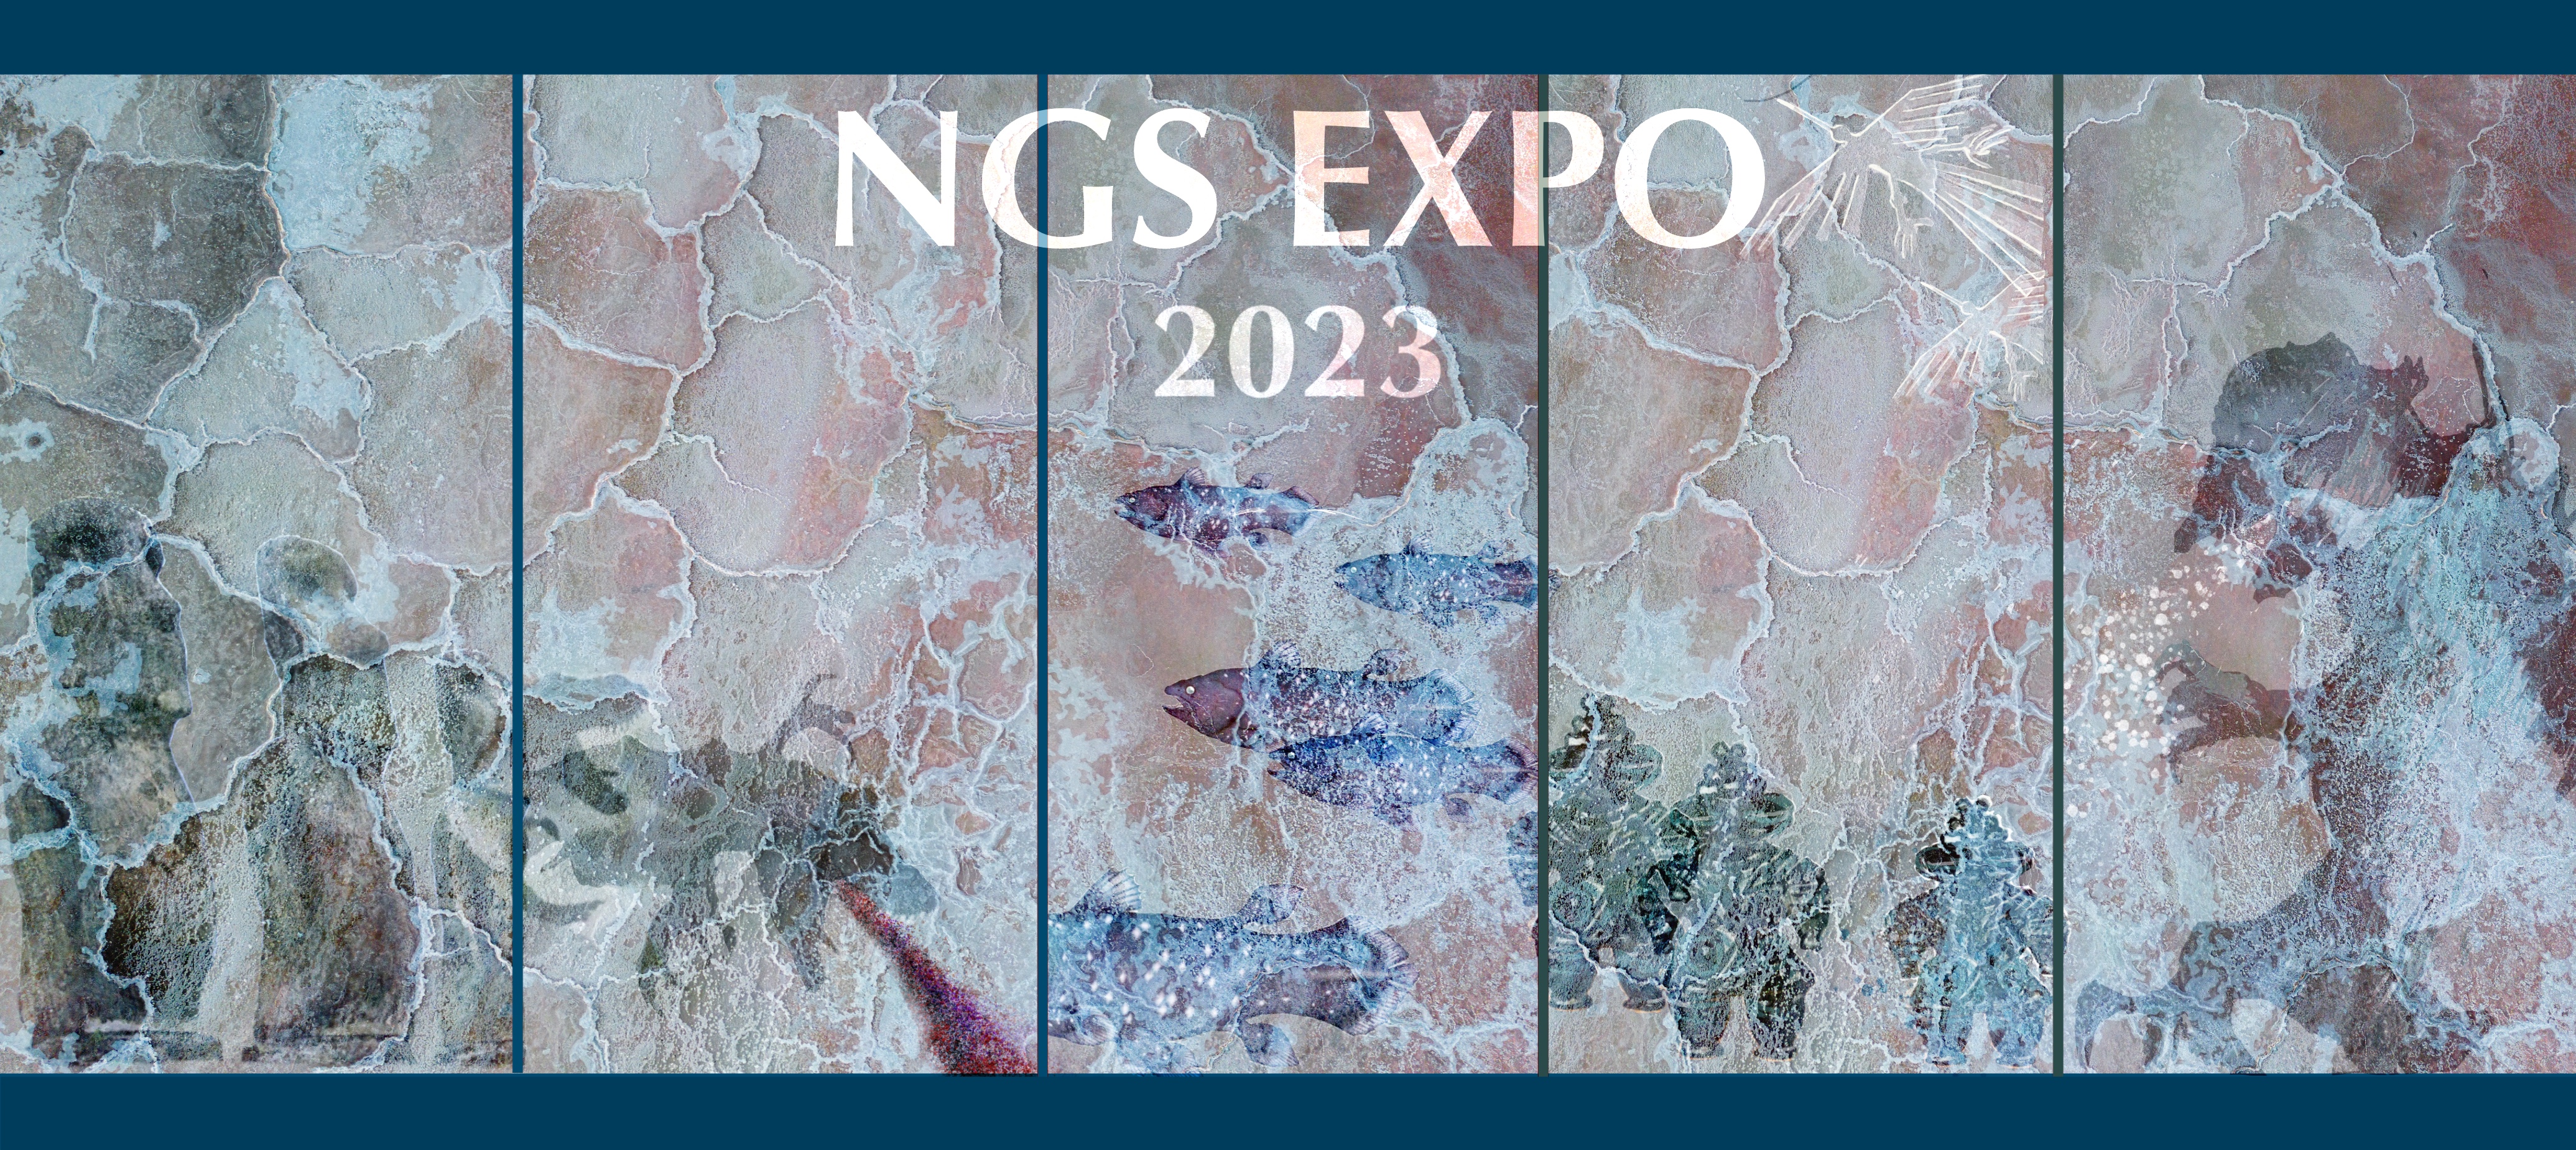 ngs expo 2022